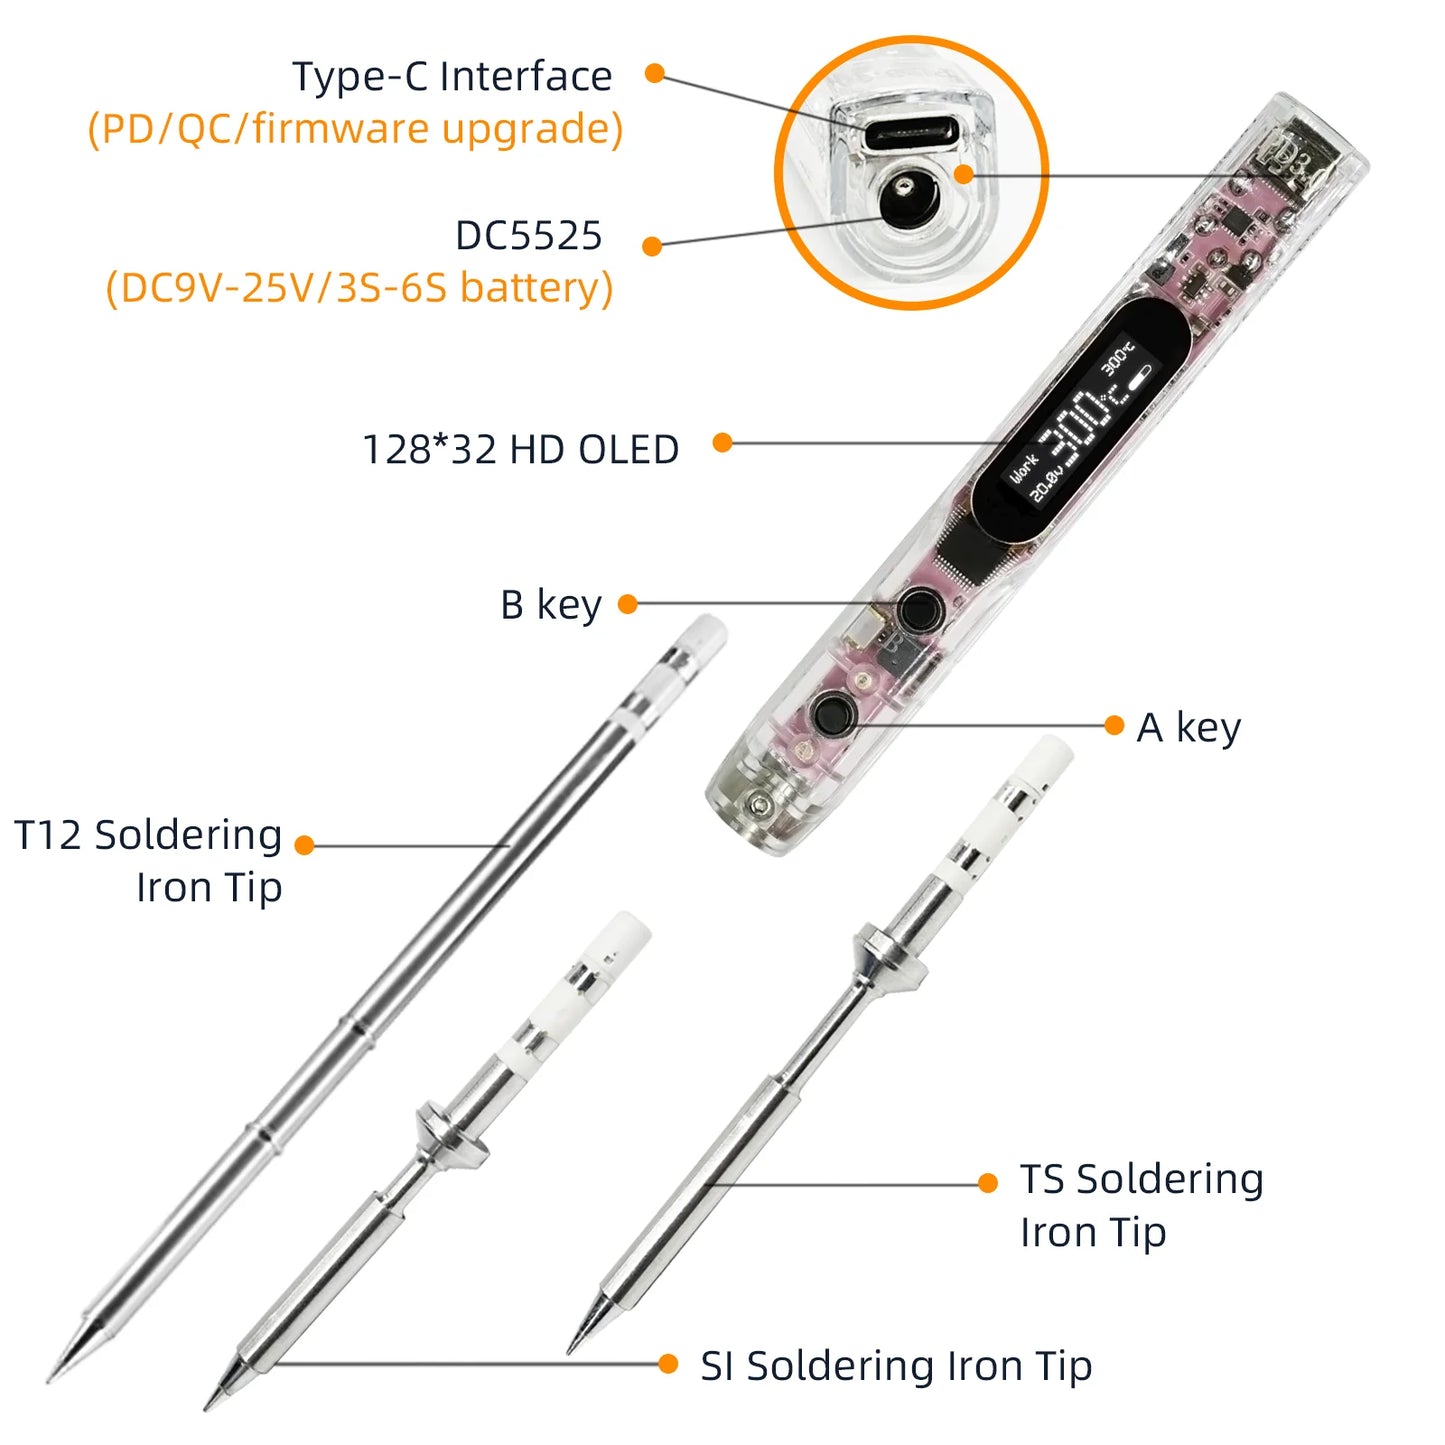 SEQURE SI012 Pro Max KIT - Fully Adjustable Portable Soldering Iron w/ TS B2 Tip, Solder, Carry Case